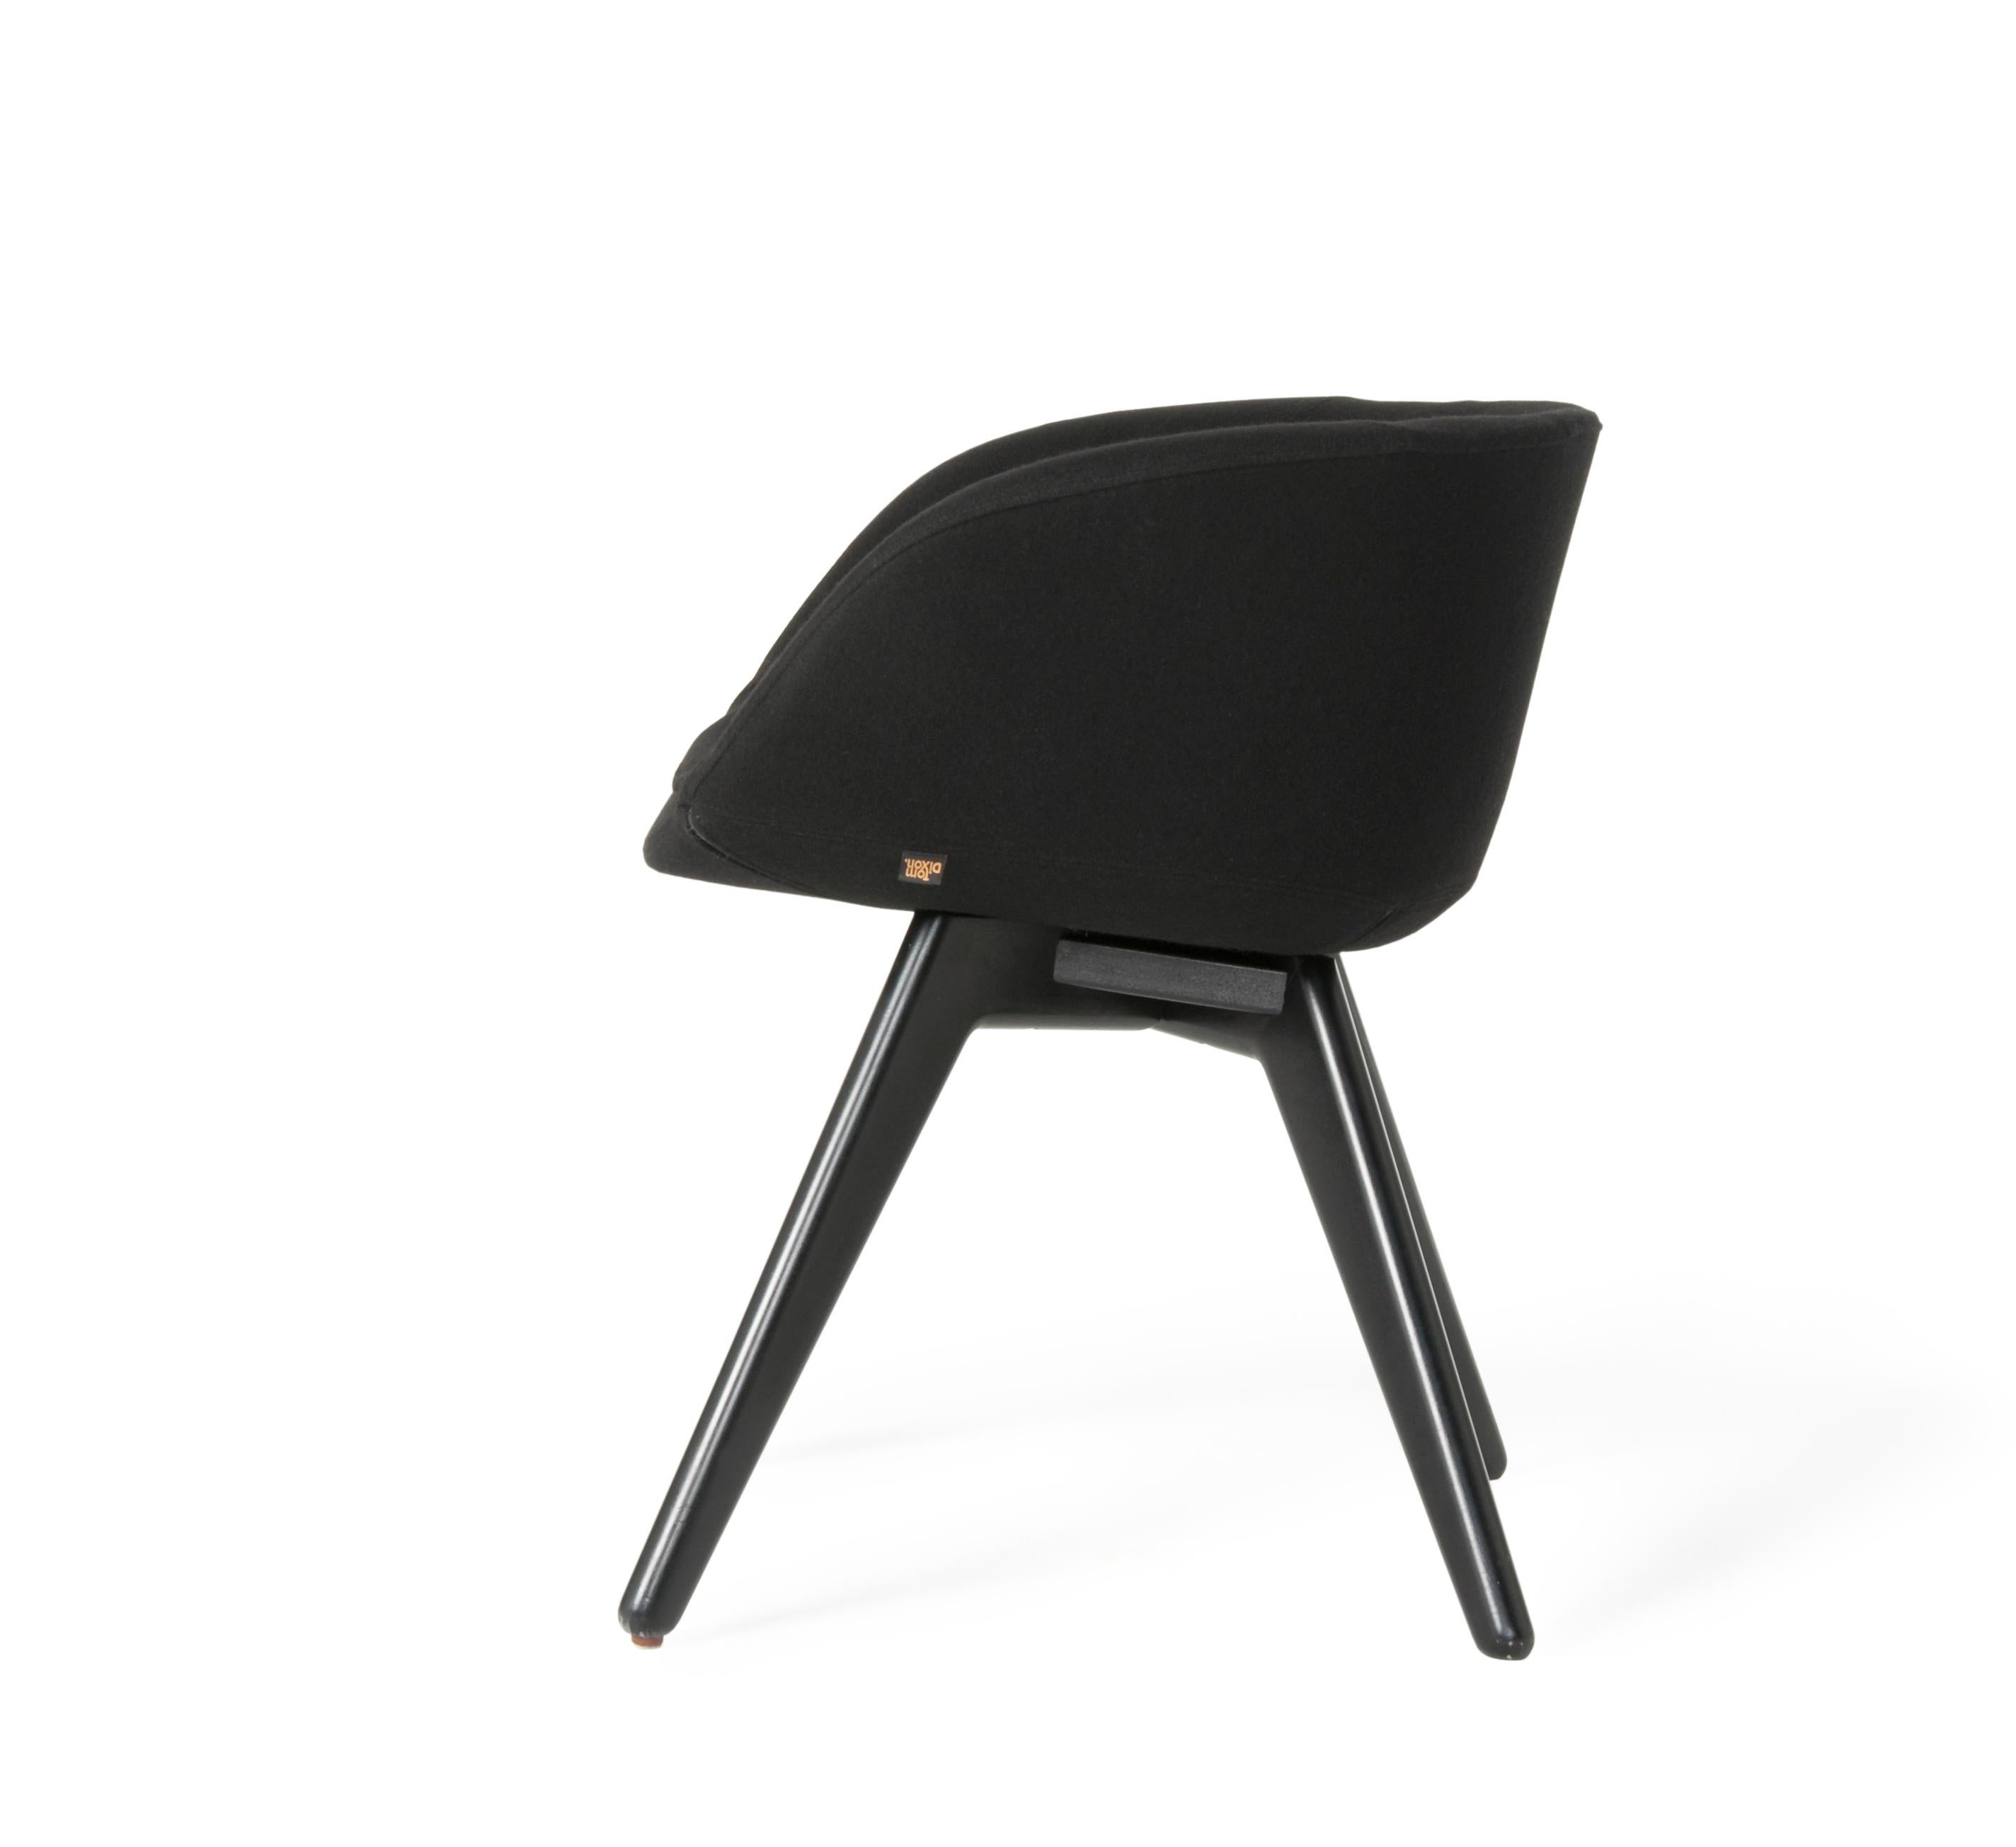 Tom Dixon scoop low chair upholstered in black tonus fabric with black oak leg.
Developed for a Design Research Studio project for the Royal Academy of Art Restaurant in London, the brief was for a chair that was generously proportioned, comfortable